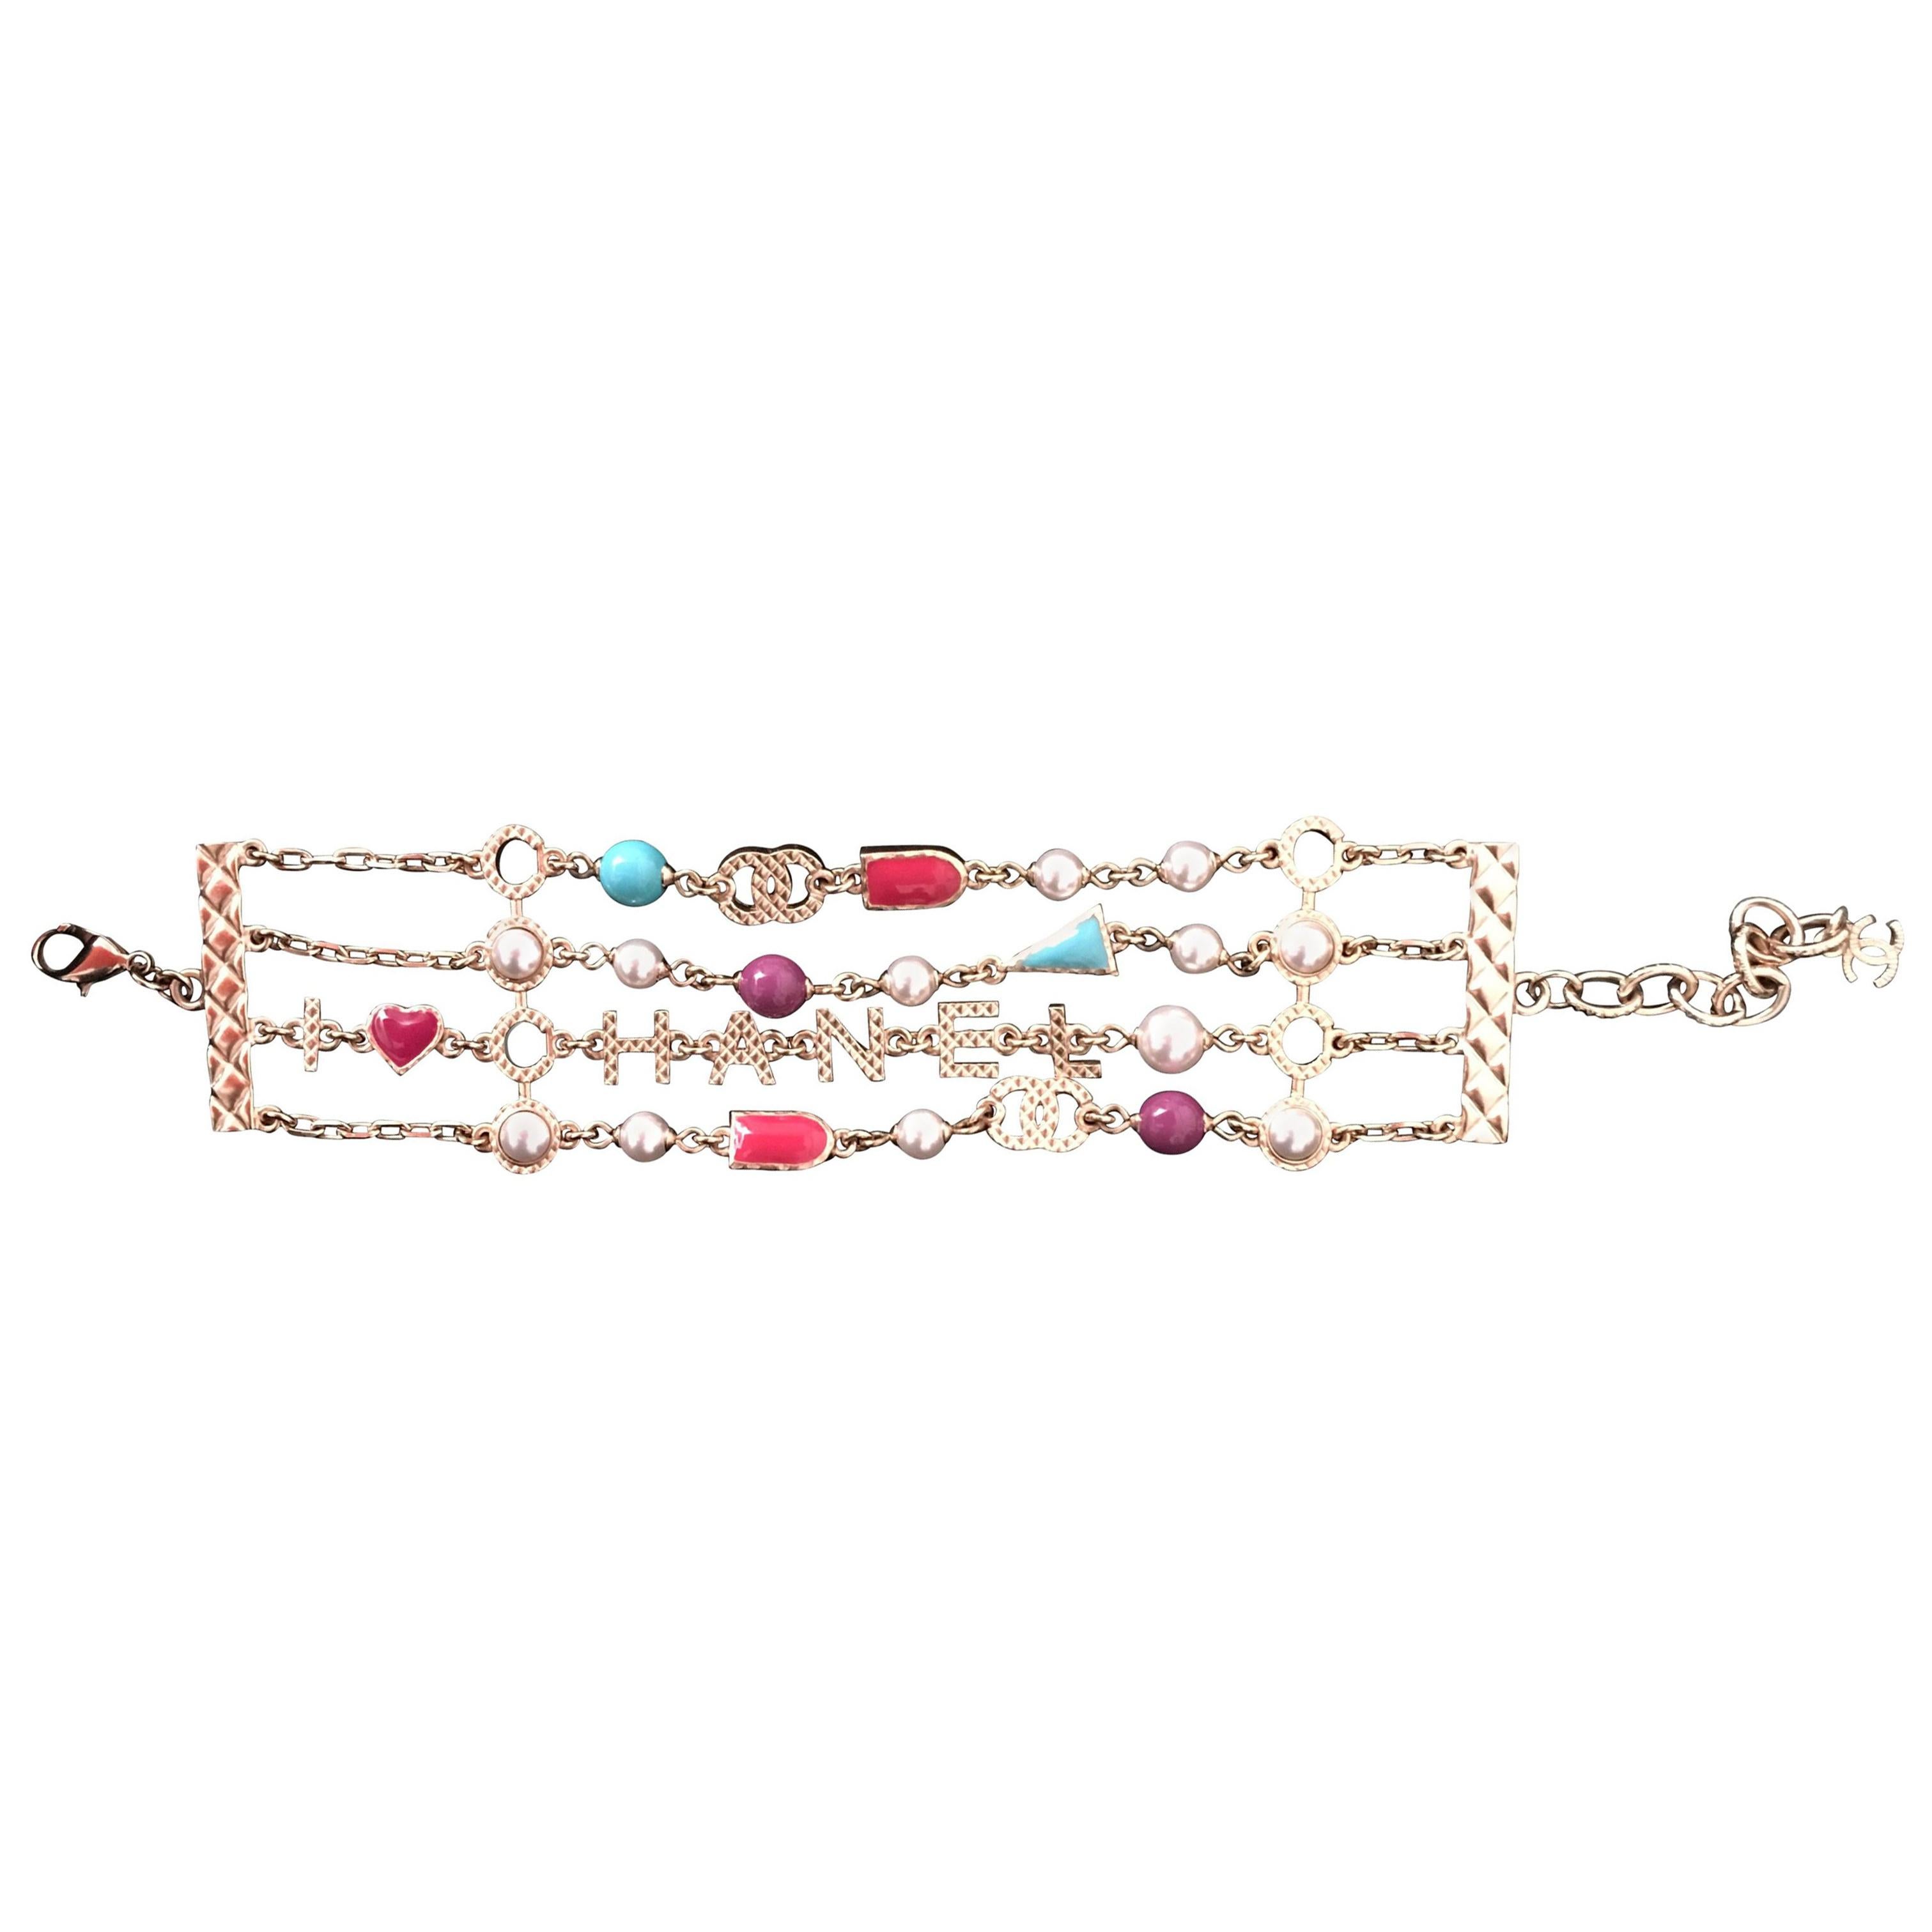 Presented here is a brand new Chanel bracelet with pearls Multi colored stones and Chanel written out one of the four chains which encompass the beautiful bracelet. The gold tone piece has four rows of very typical Chanel classic style., with white